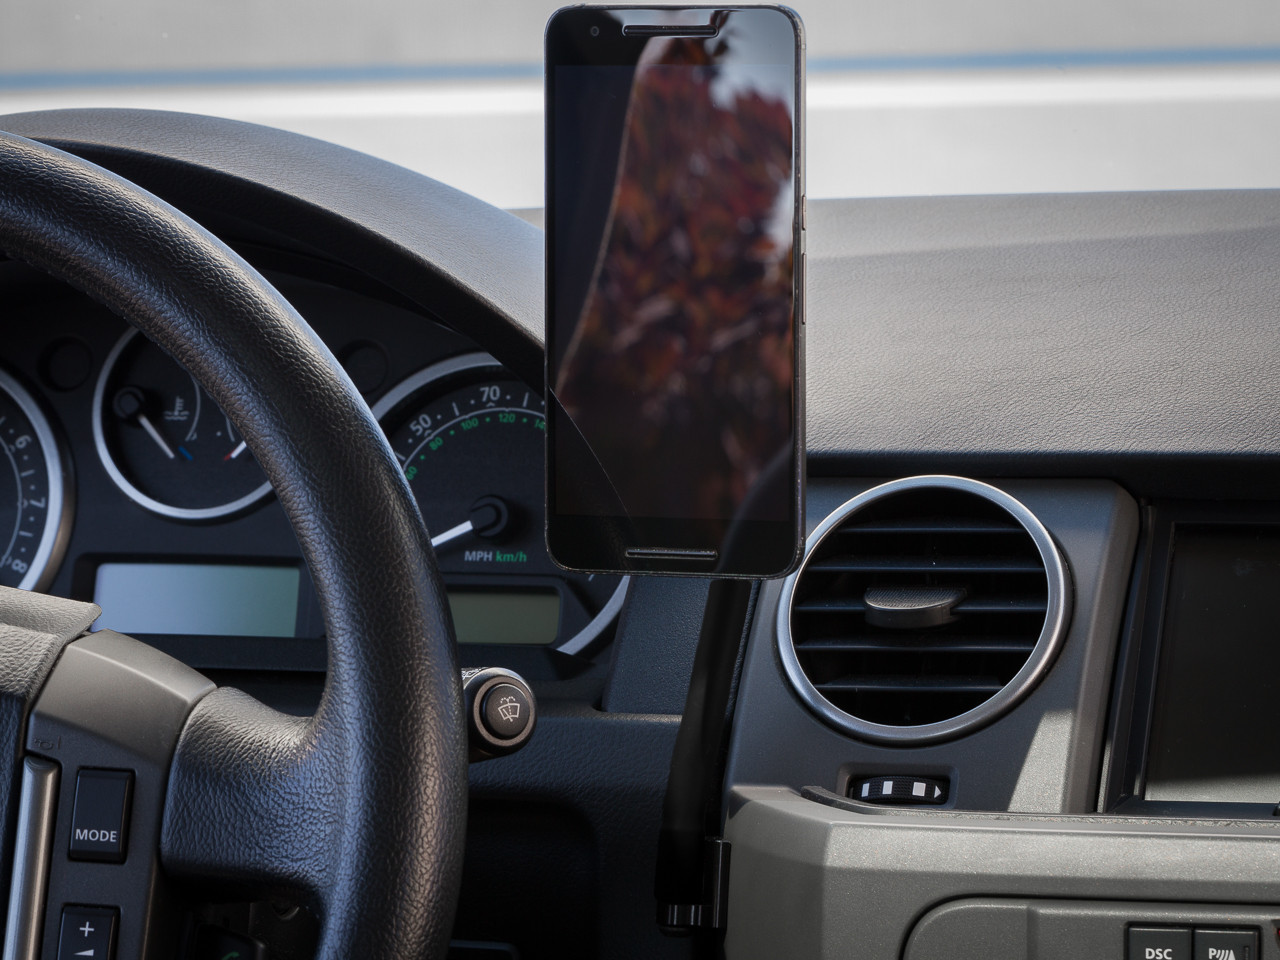 BMW i3 iPhone accessory for MagSafe mount - LAVA LABS